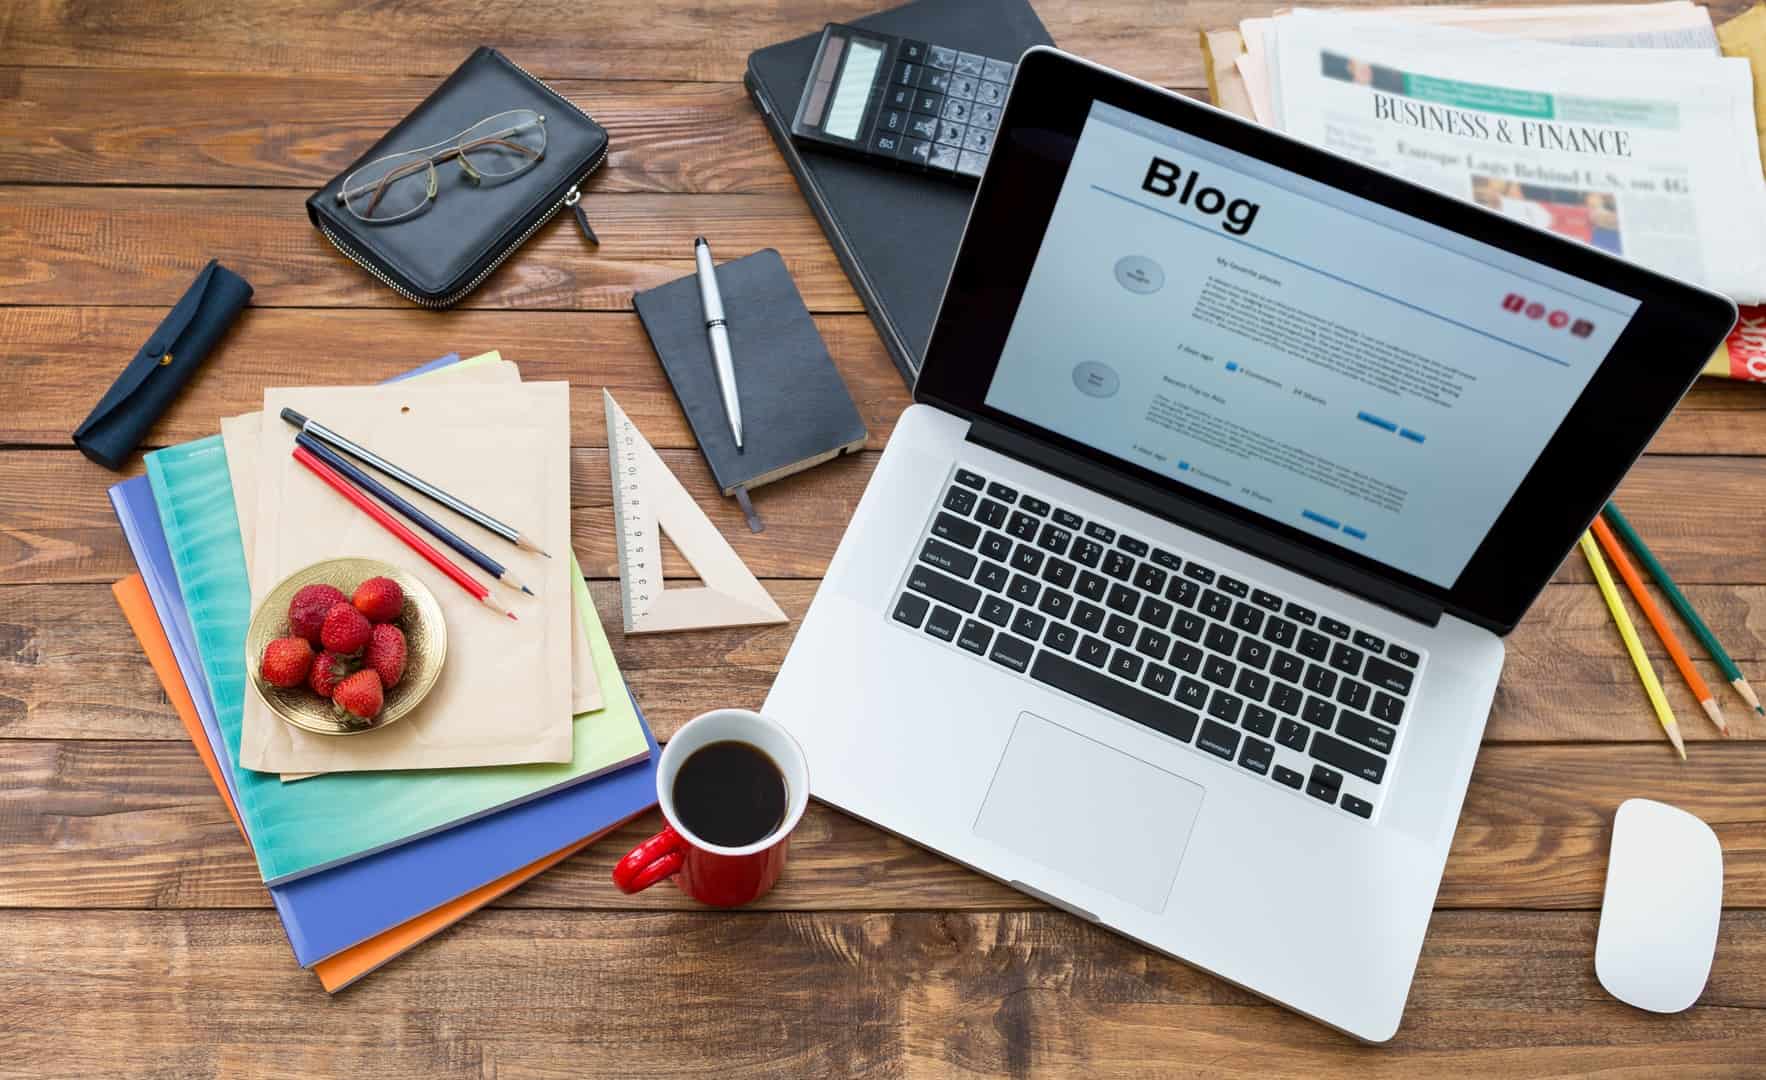 The Benefits of Blogging for Businesses